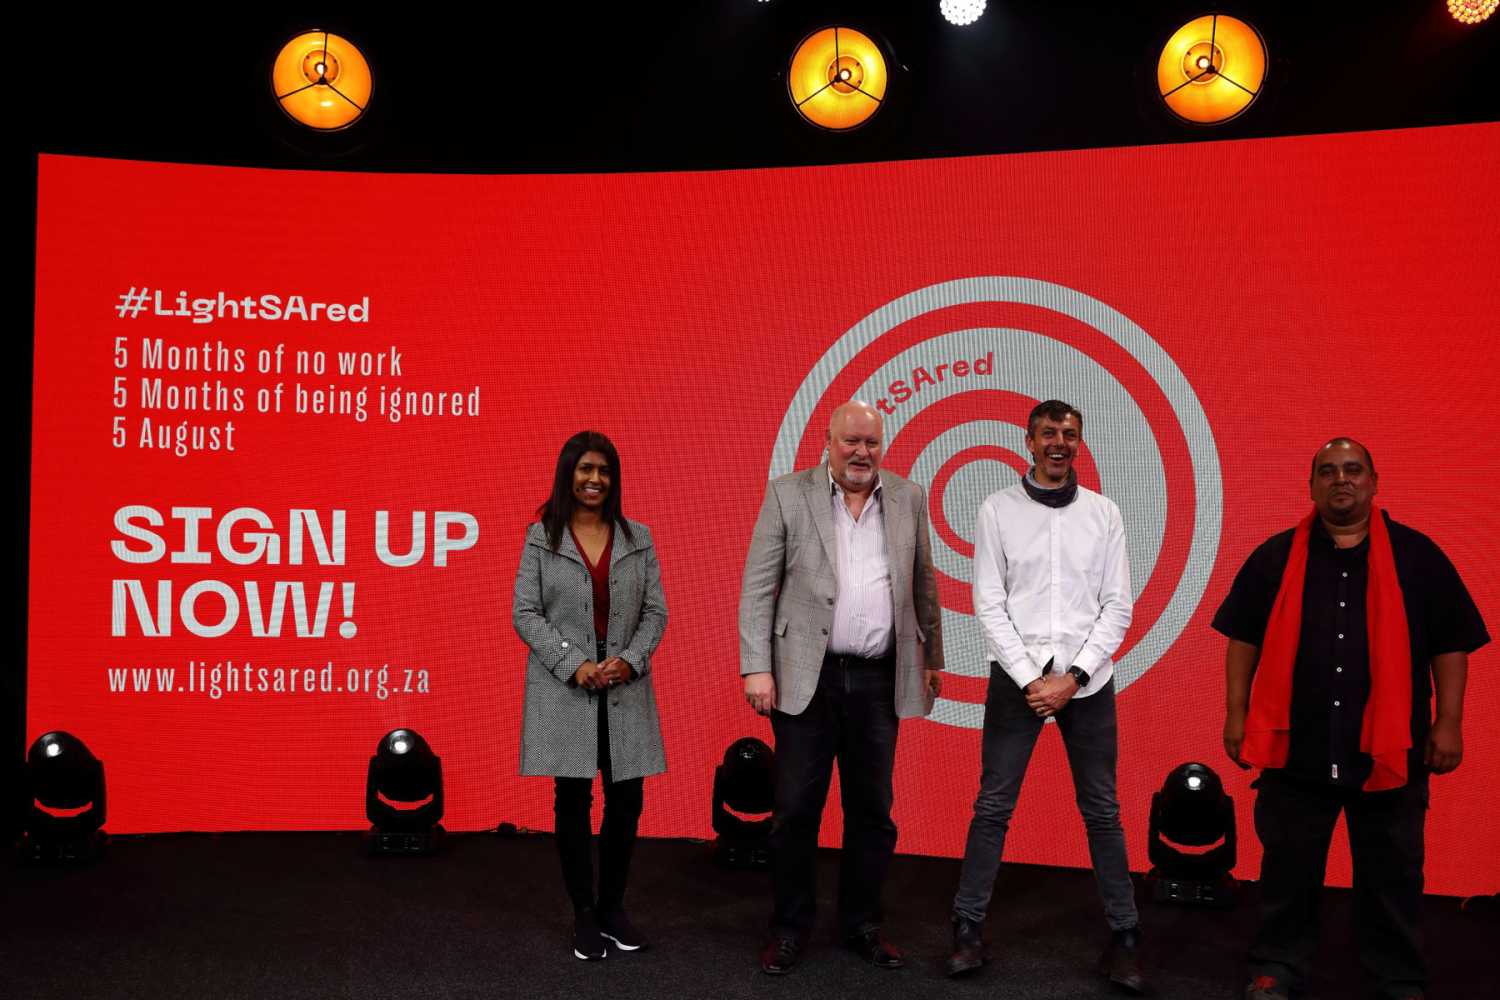 Projeni Pather, Kevan Jones, Duncan Riley and Sharif Baker launch the #LightSAred campaign during a live stream in Johannesburg